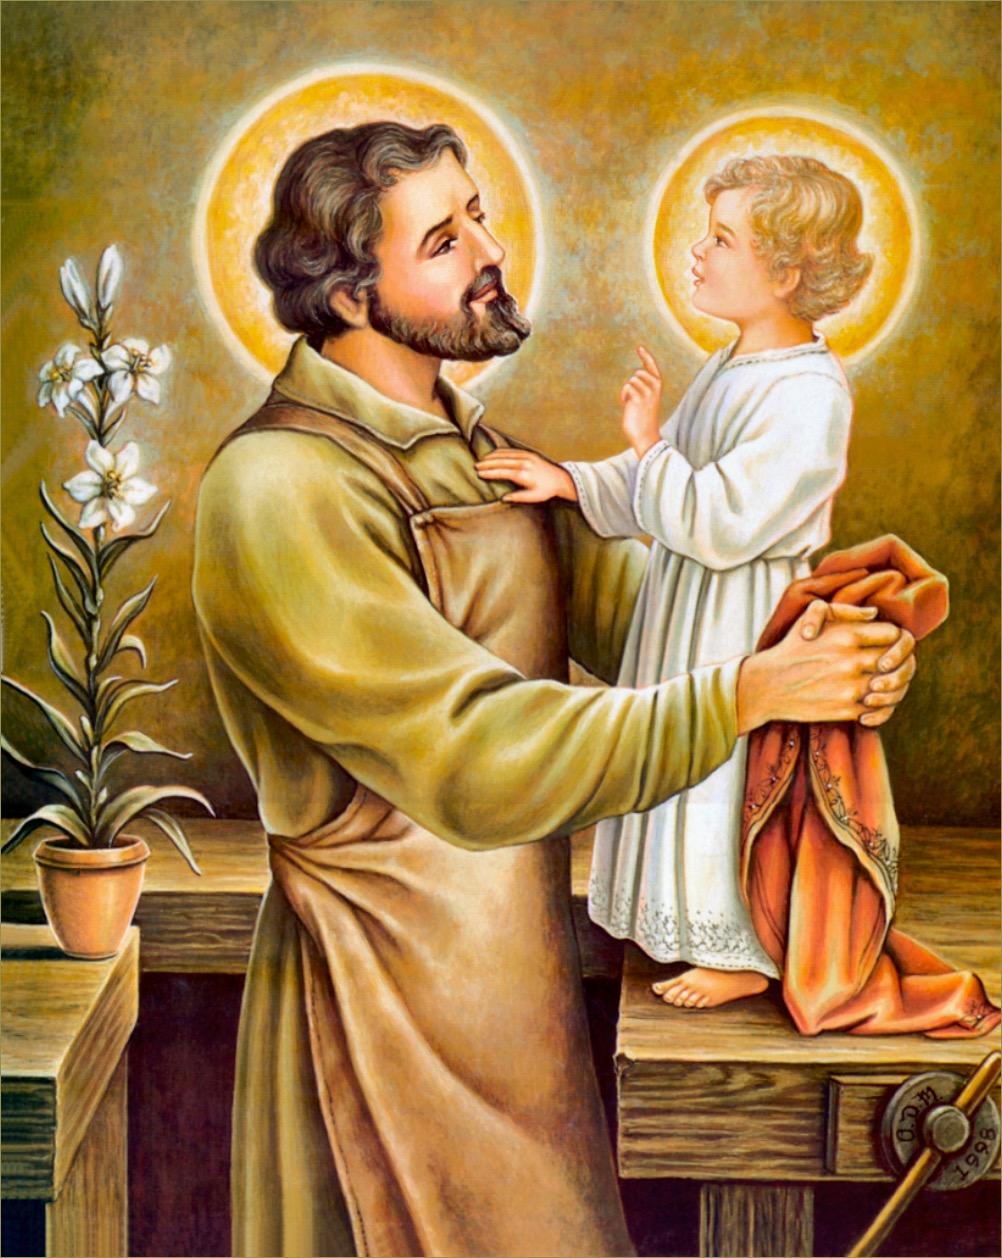 Prayer to St. Joseph Glorious Saint Joseph, foster-father and protector of Jesus Christ, to you I raise my heart and my hands to implore your powerful intercession.